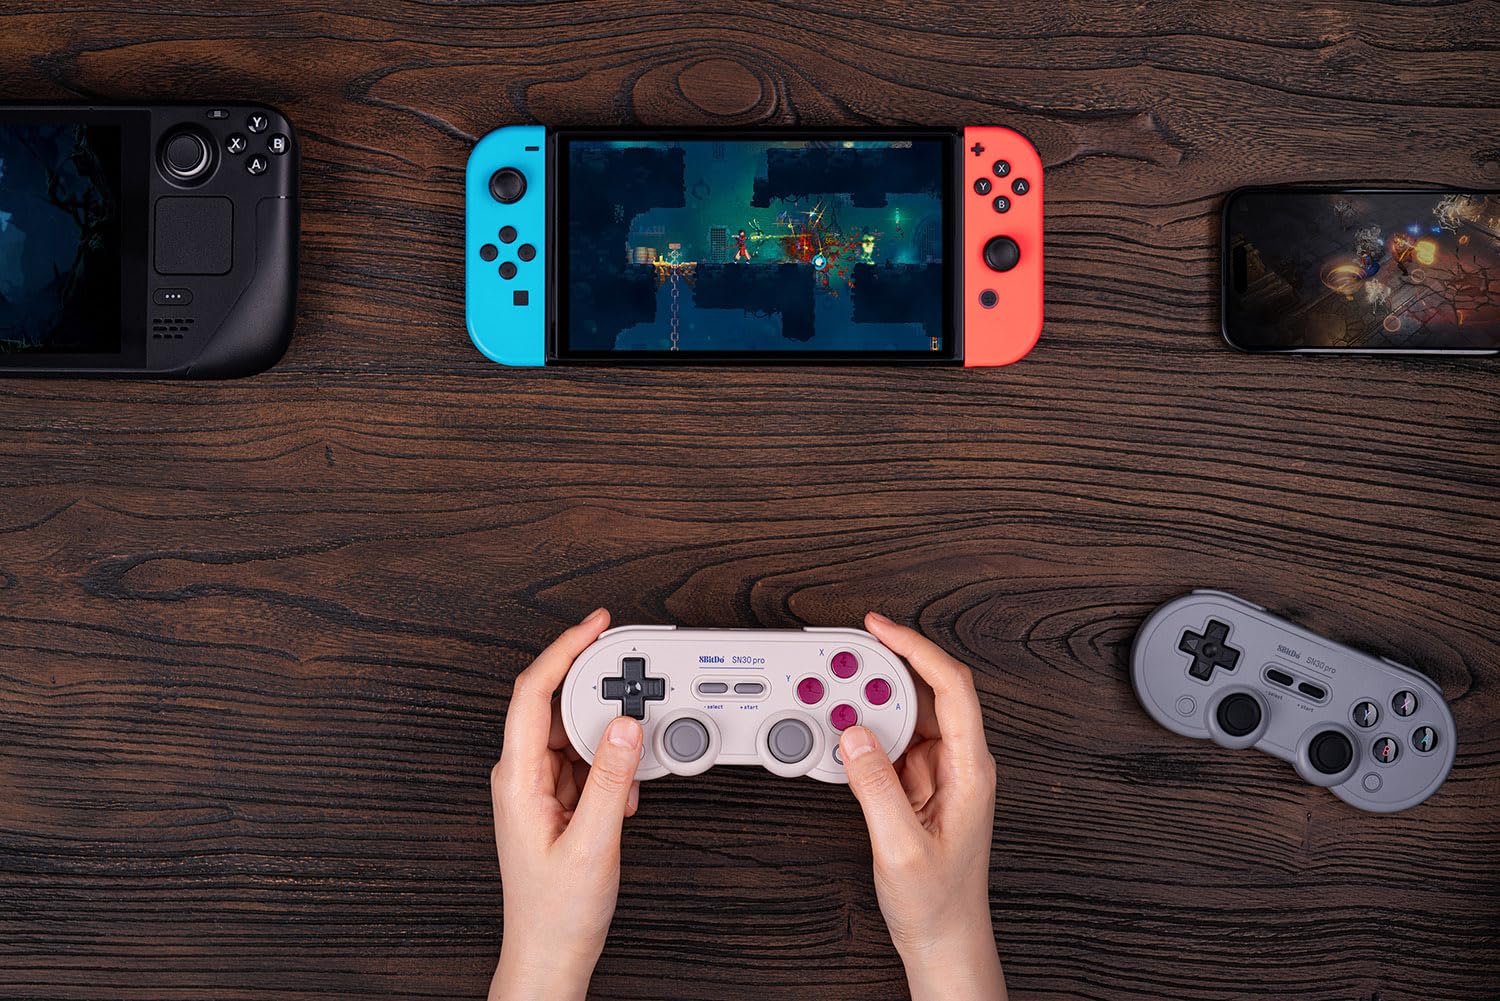 8BitDo SN30 Pro Bluetooth Controller, Hall Effect Joystick Update, Compatible with Switch, PC, macOS, Android, Steam Deck & Raspberry Pi (Gray)